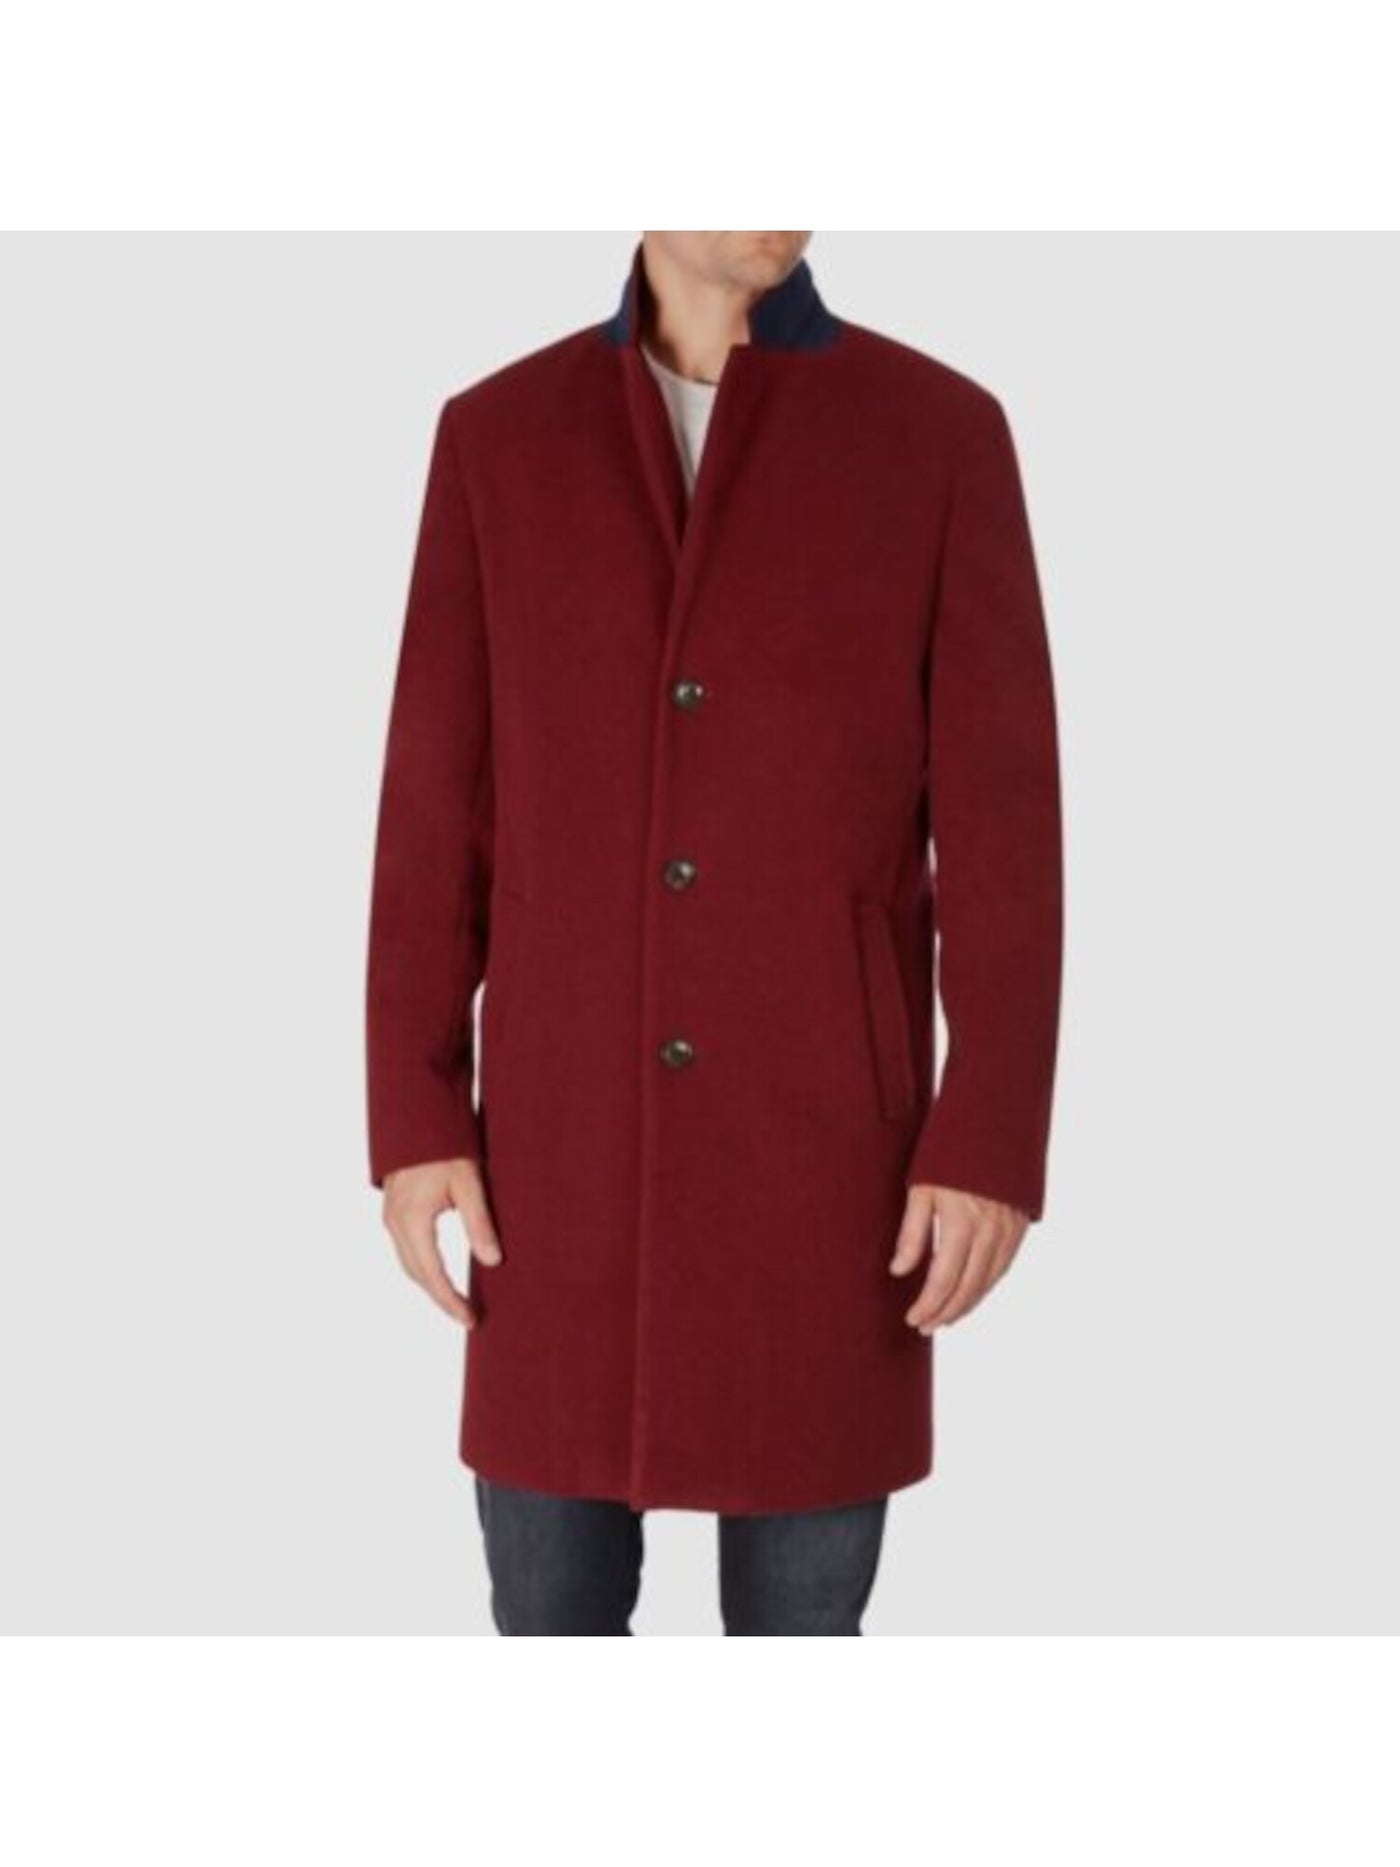 TOMMY HILFIGER Mens Addison Maroon Single Breasted, Wool Blend Overcoat 46R